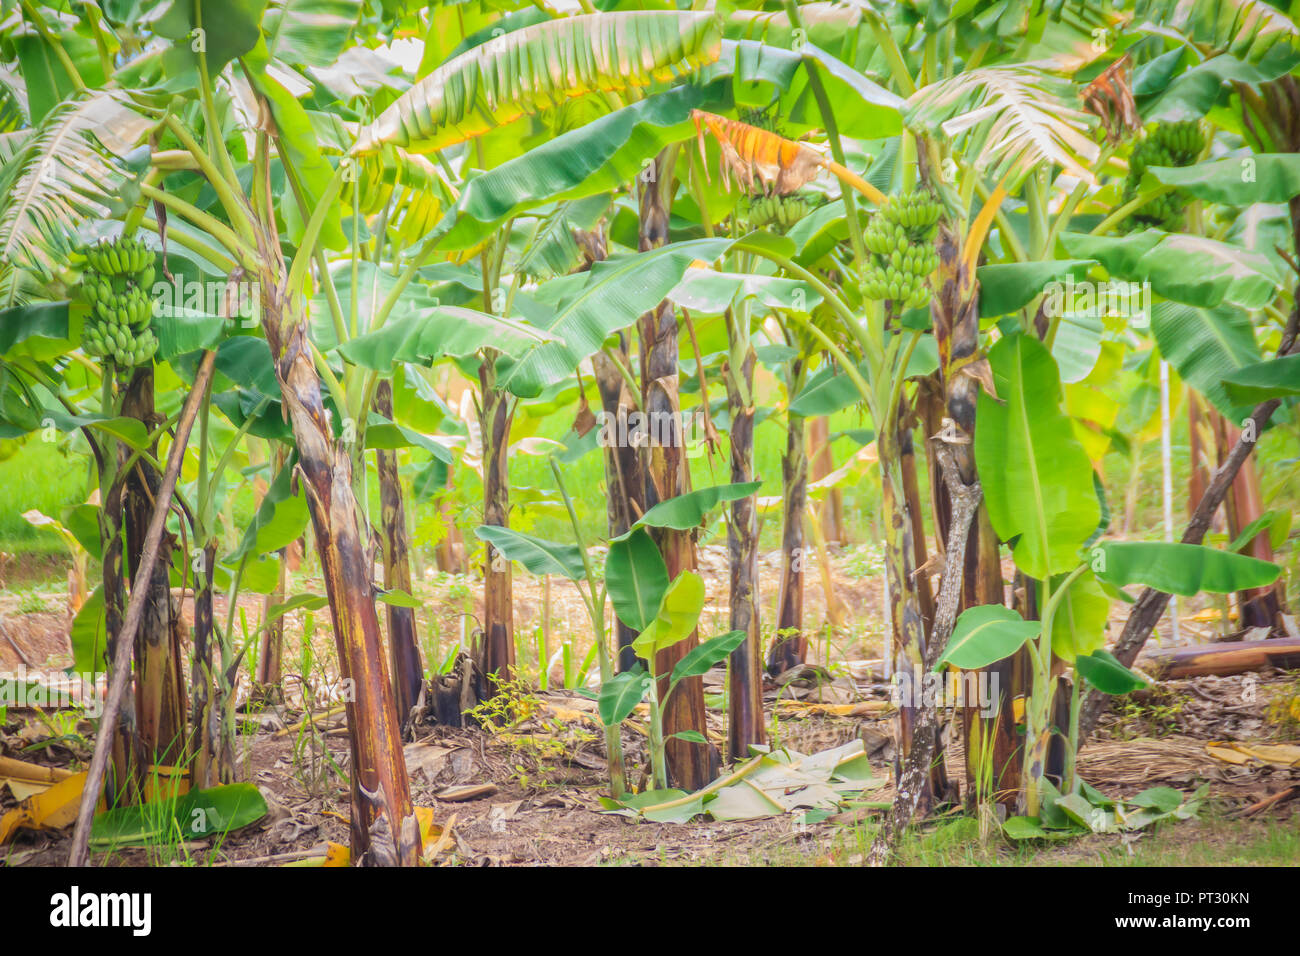 Organic green forest of banana trees with bunch of young green banana ...